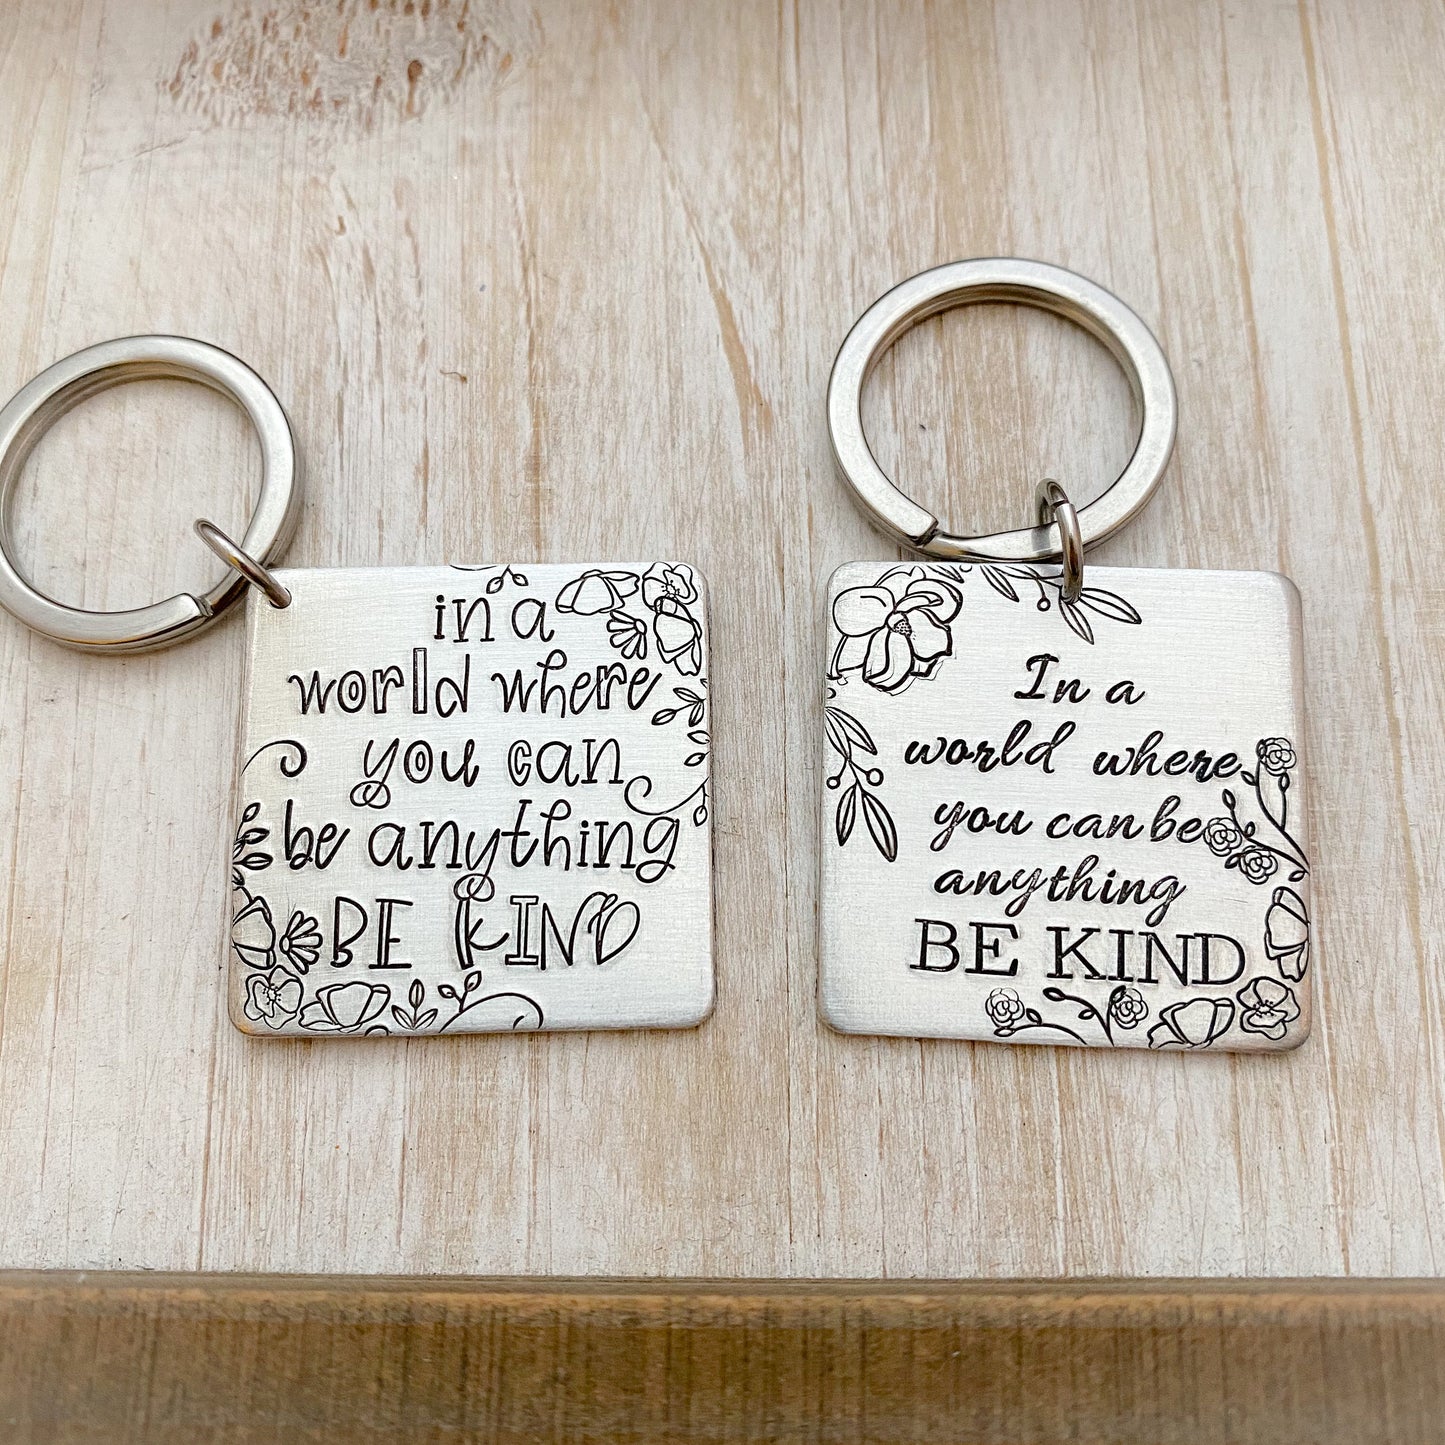 In a world where you can be anything BE KIND--choose kind keychain--kindness keychain--encouragement gift--custom keychain--inspiring quote